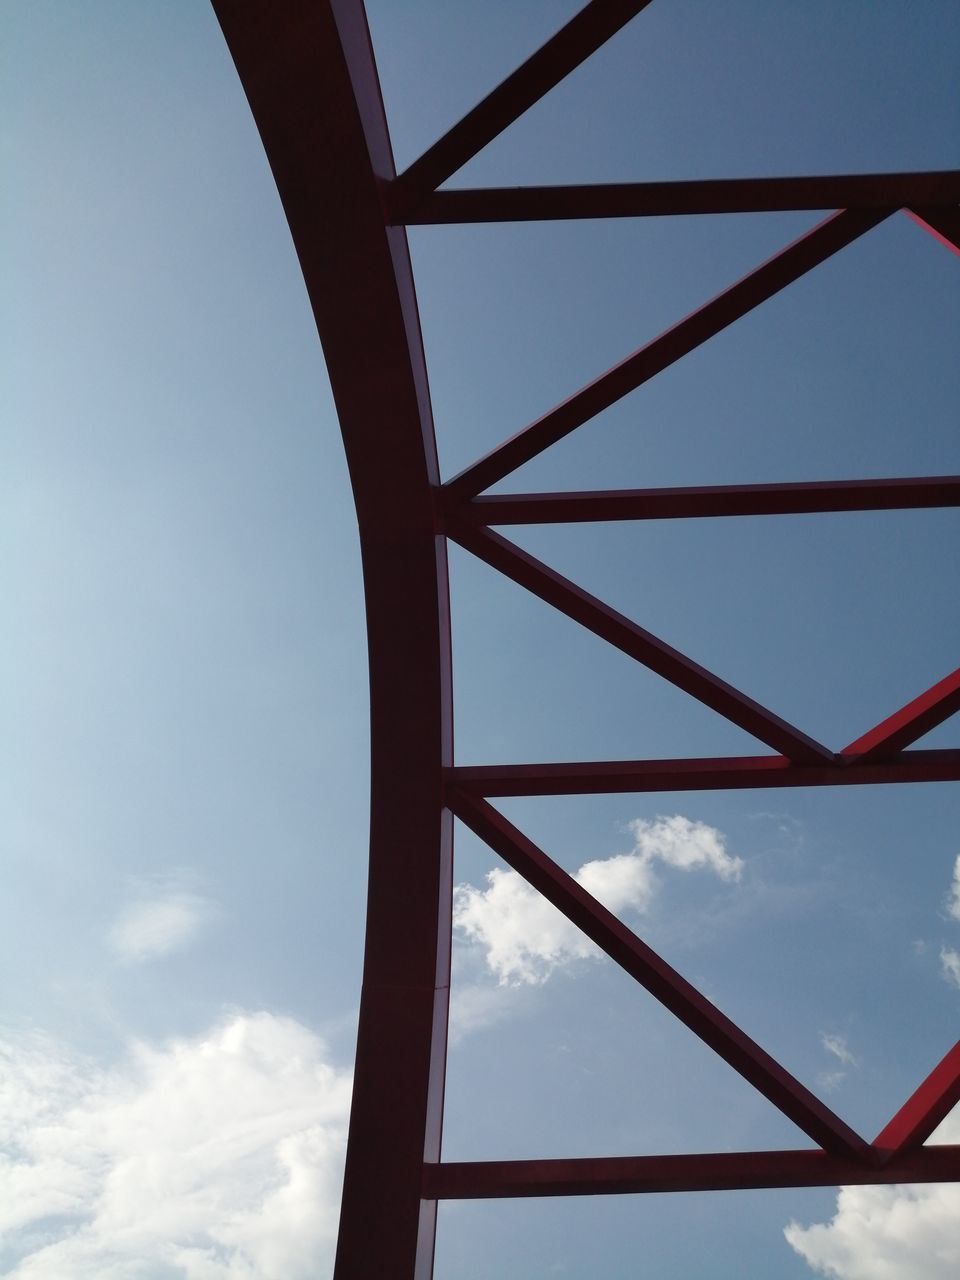 LOW ANGLE VIEW OF METAL STRUCTURE AGAINST SKY